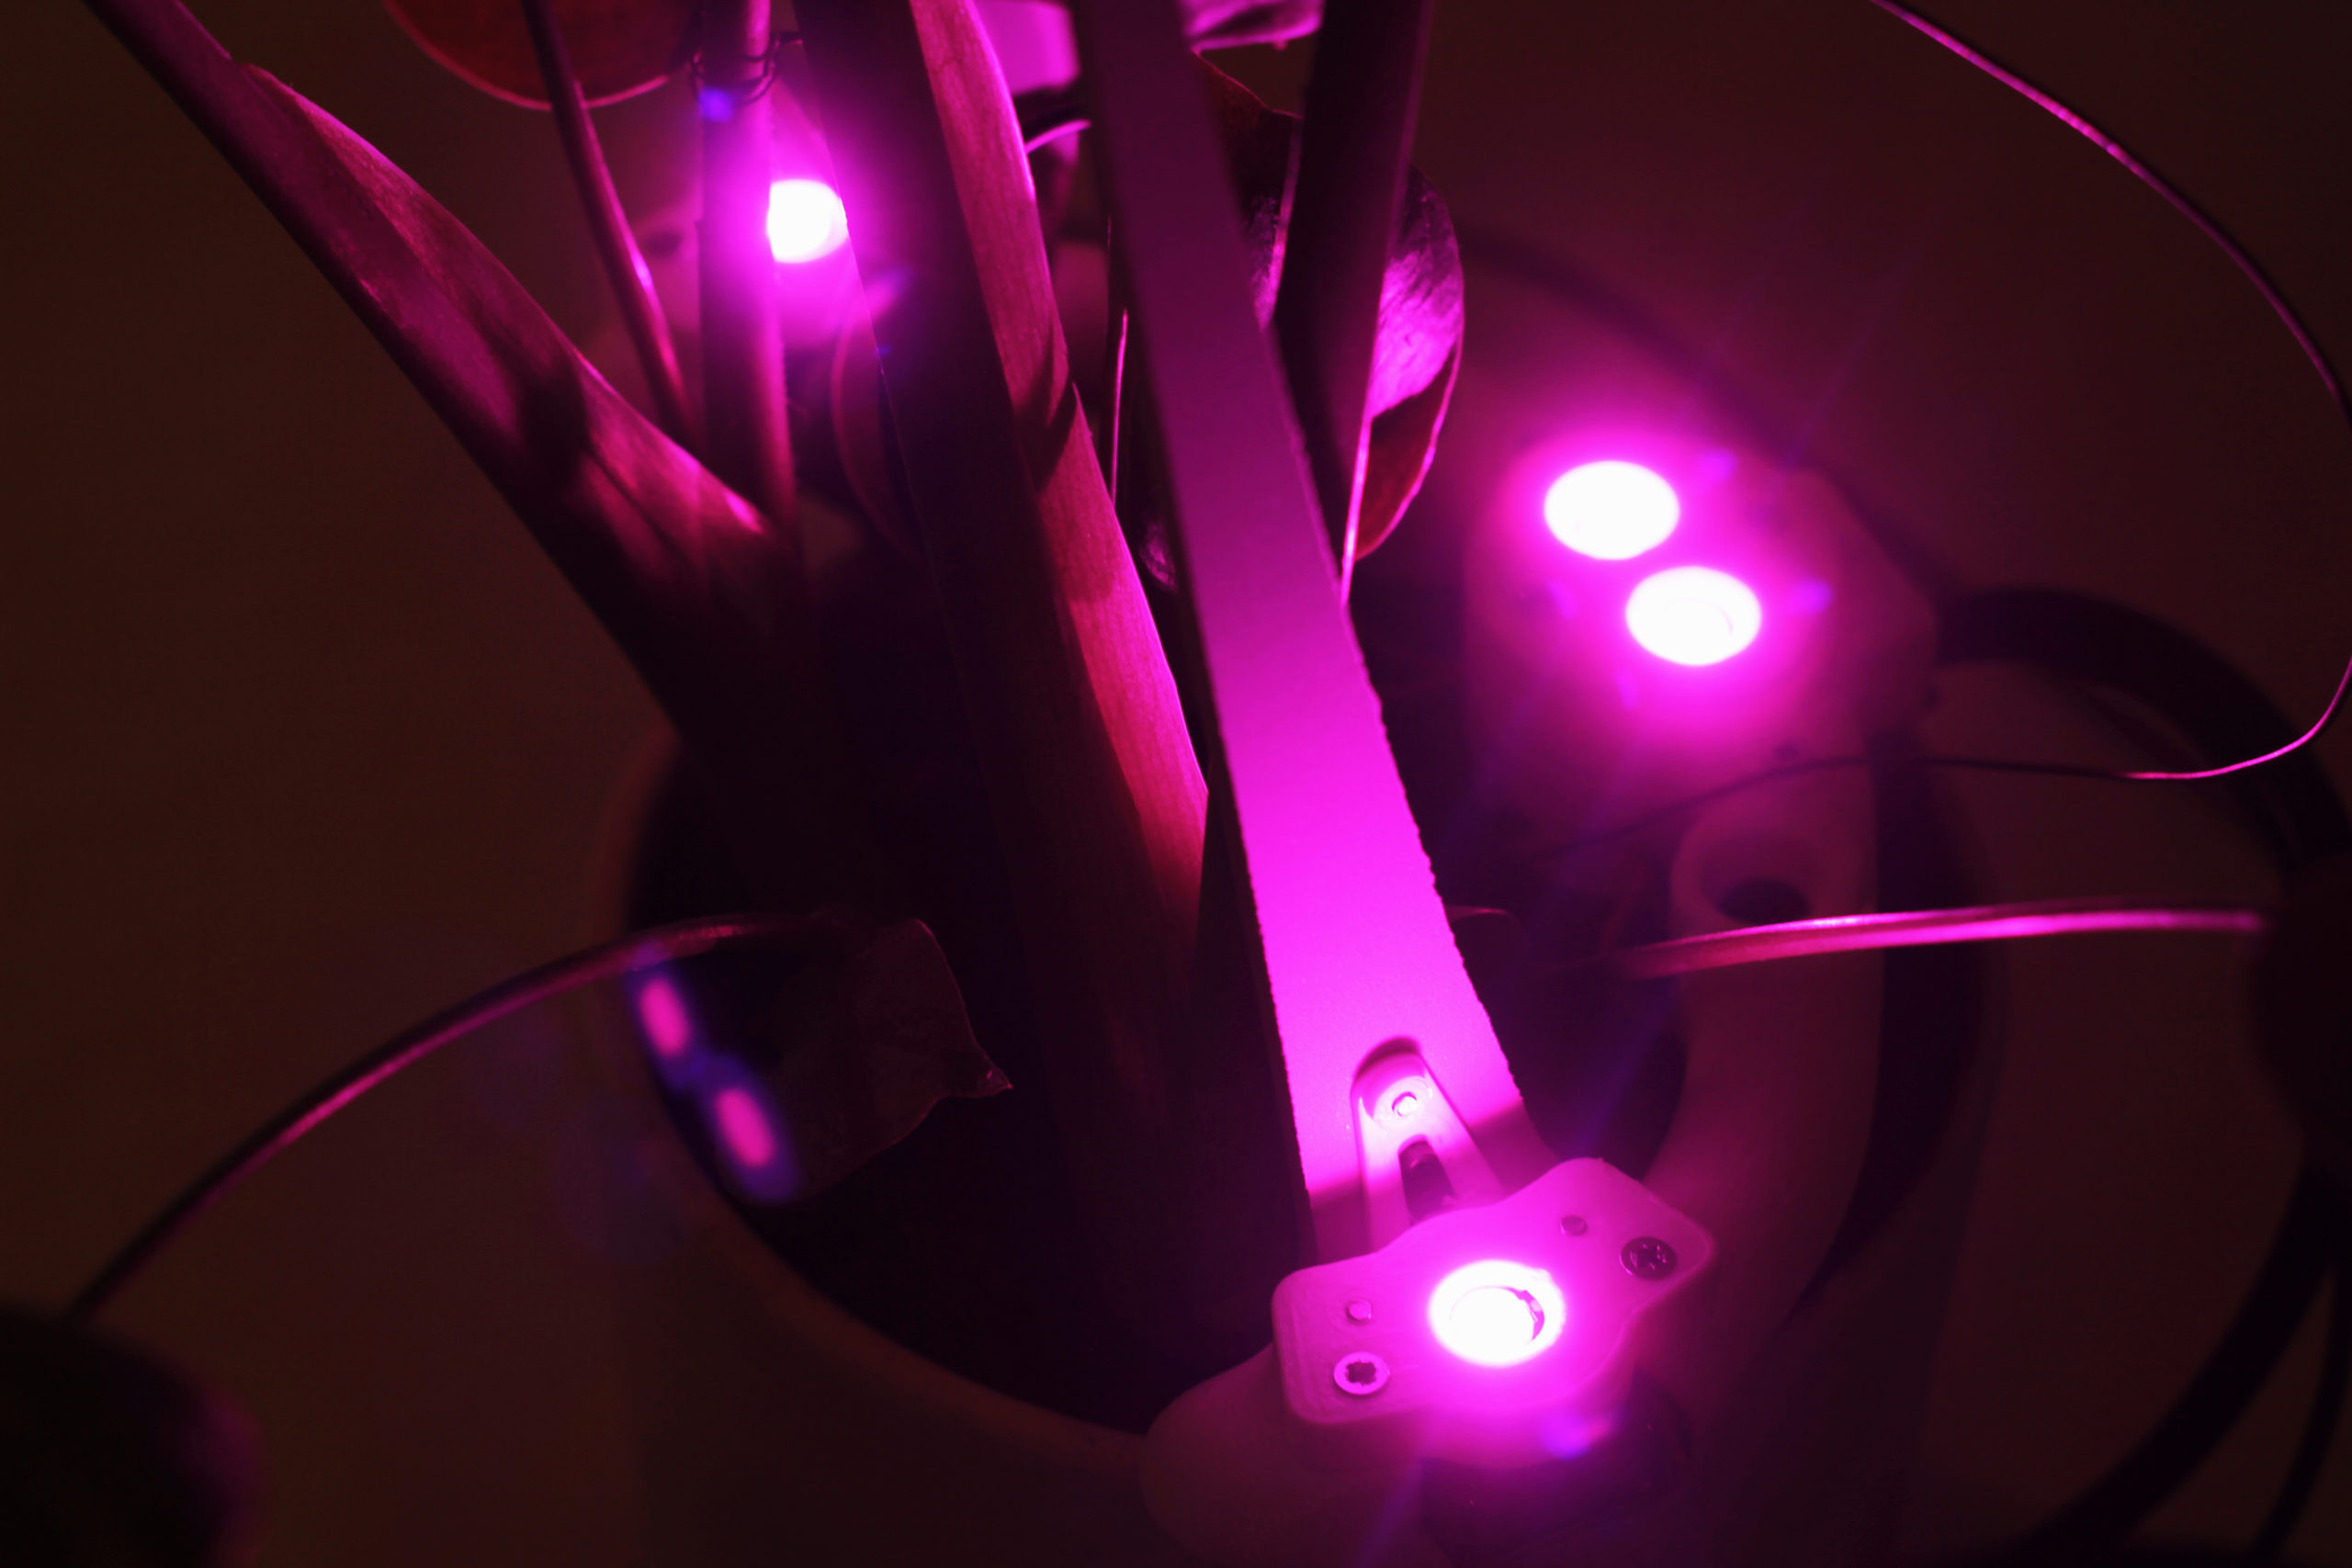 the sensors lighting up a plant in purple light